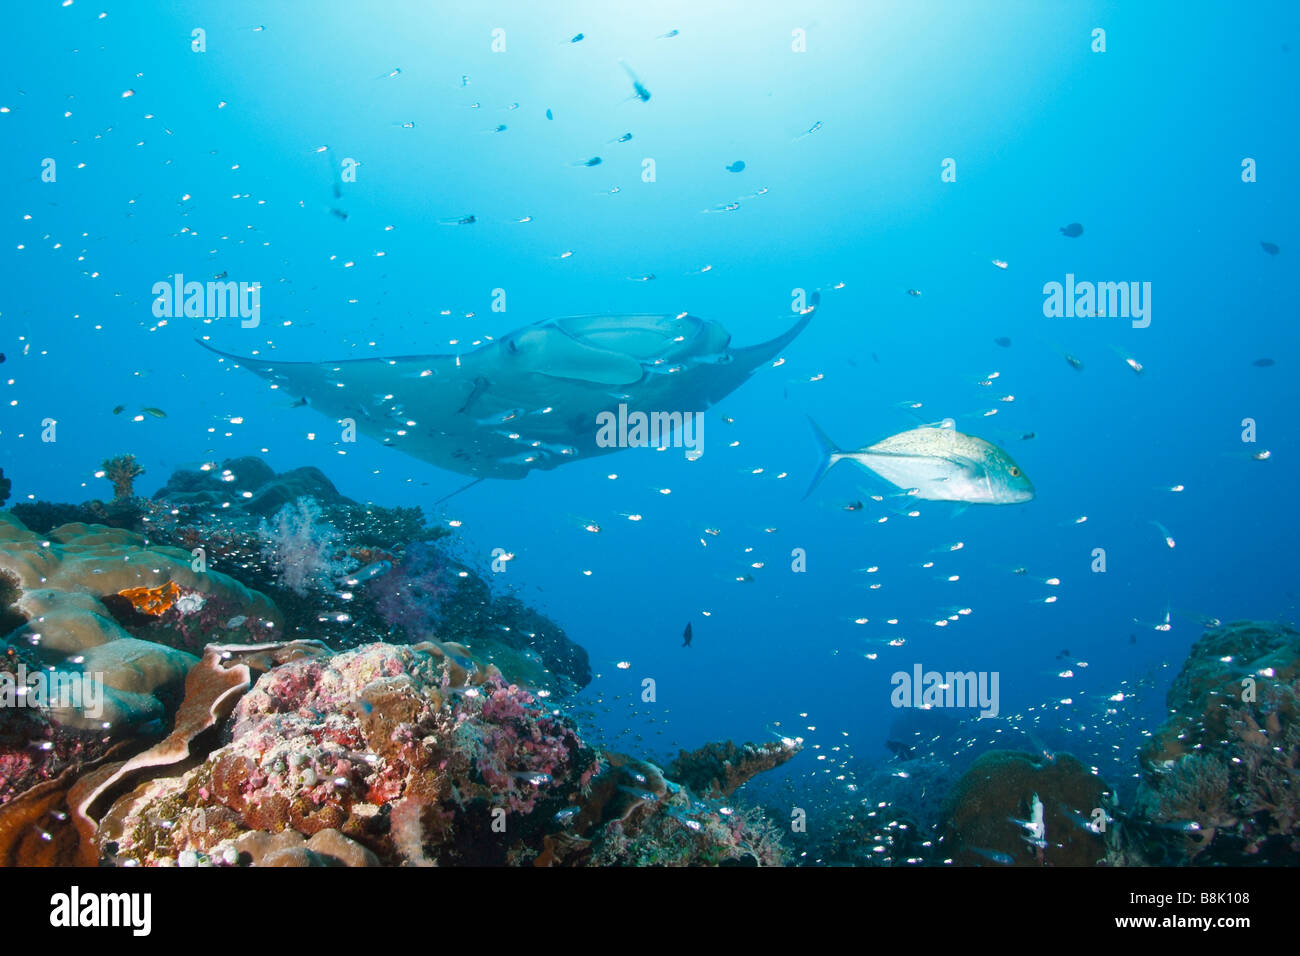 Manta ray approaching a colorful coral reef with school of glass fishes and reef fish sihouettes with the sun in background Stock Photo